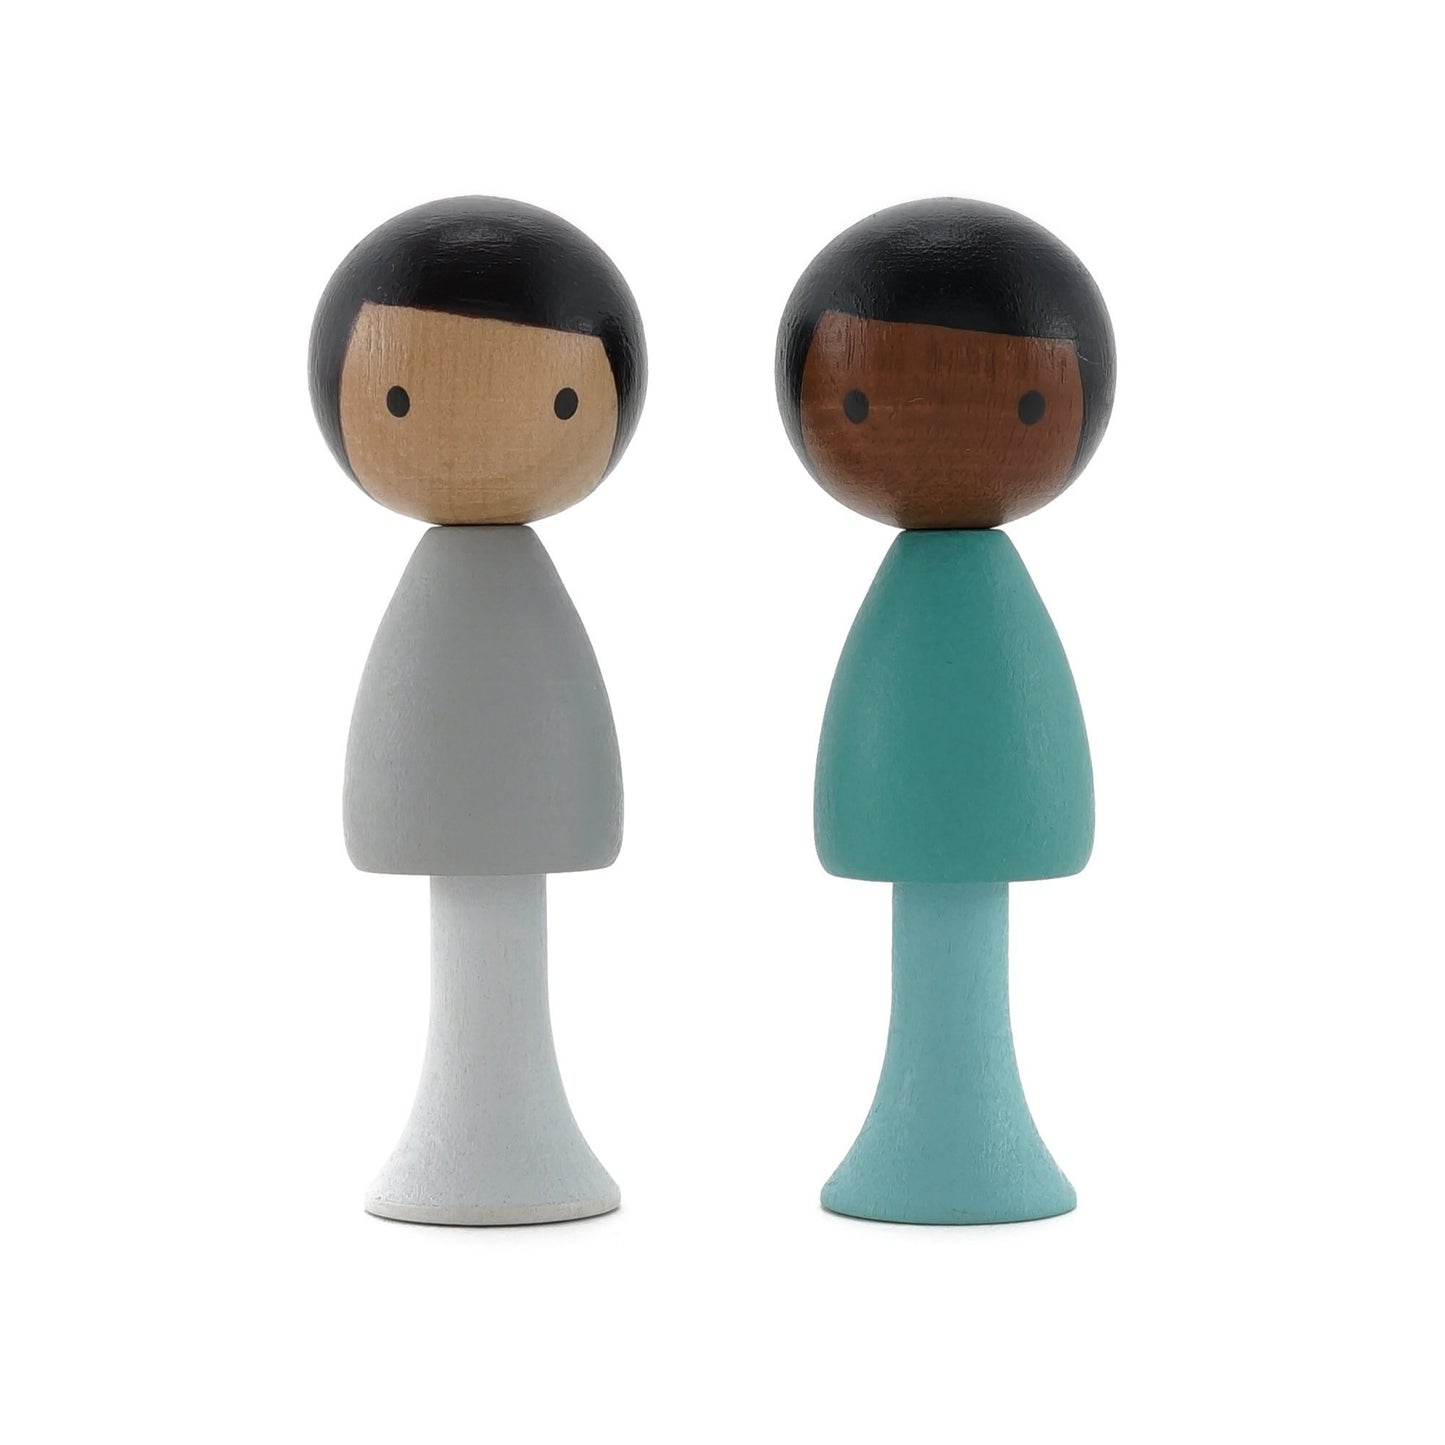 CLiCQUES Magnetic Figurines - Sam & Justin - Wood Wood Toys Canada's Favourite Montessori Toy Store